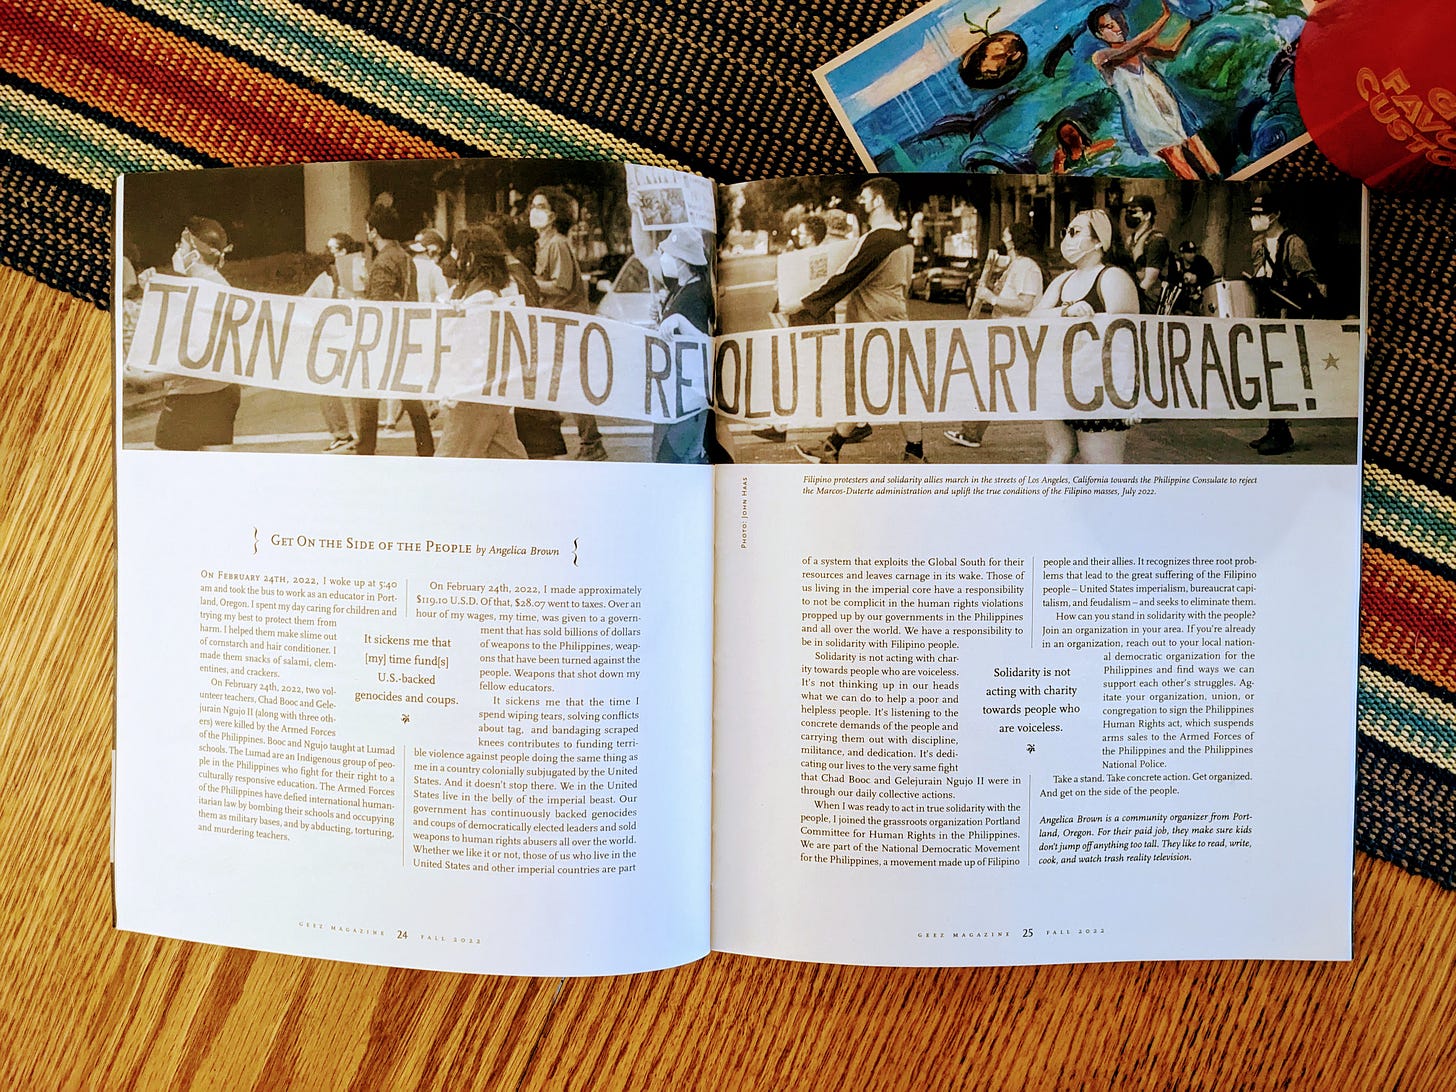 A magazine open on a table, with a photo of people carrying a banner that reads: "Turn grief into revolutionary courage!"